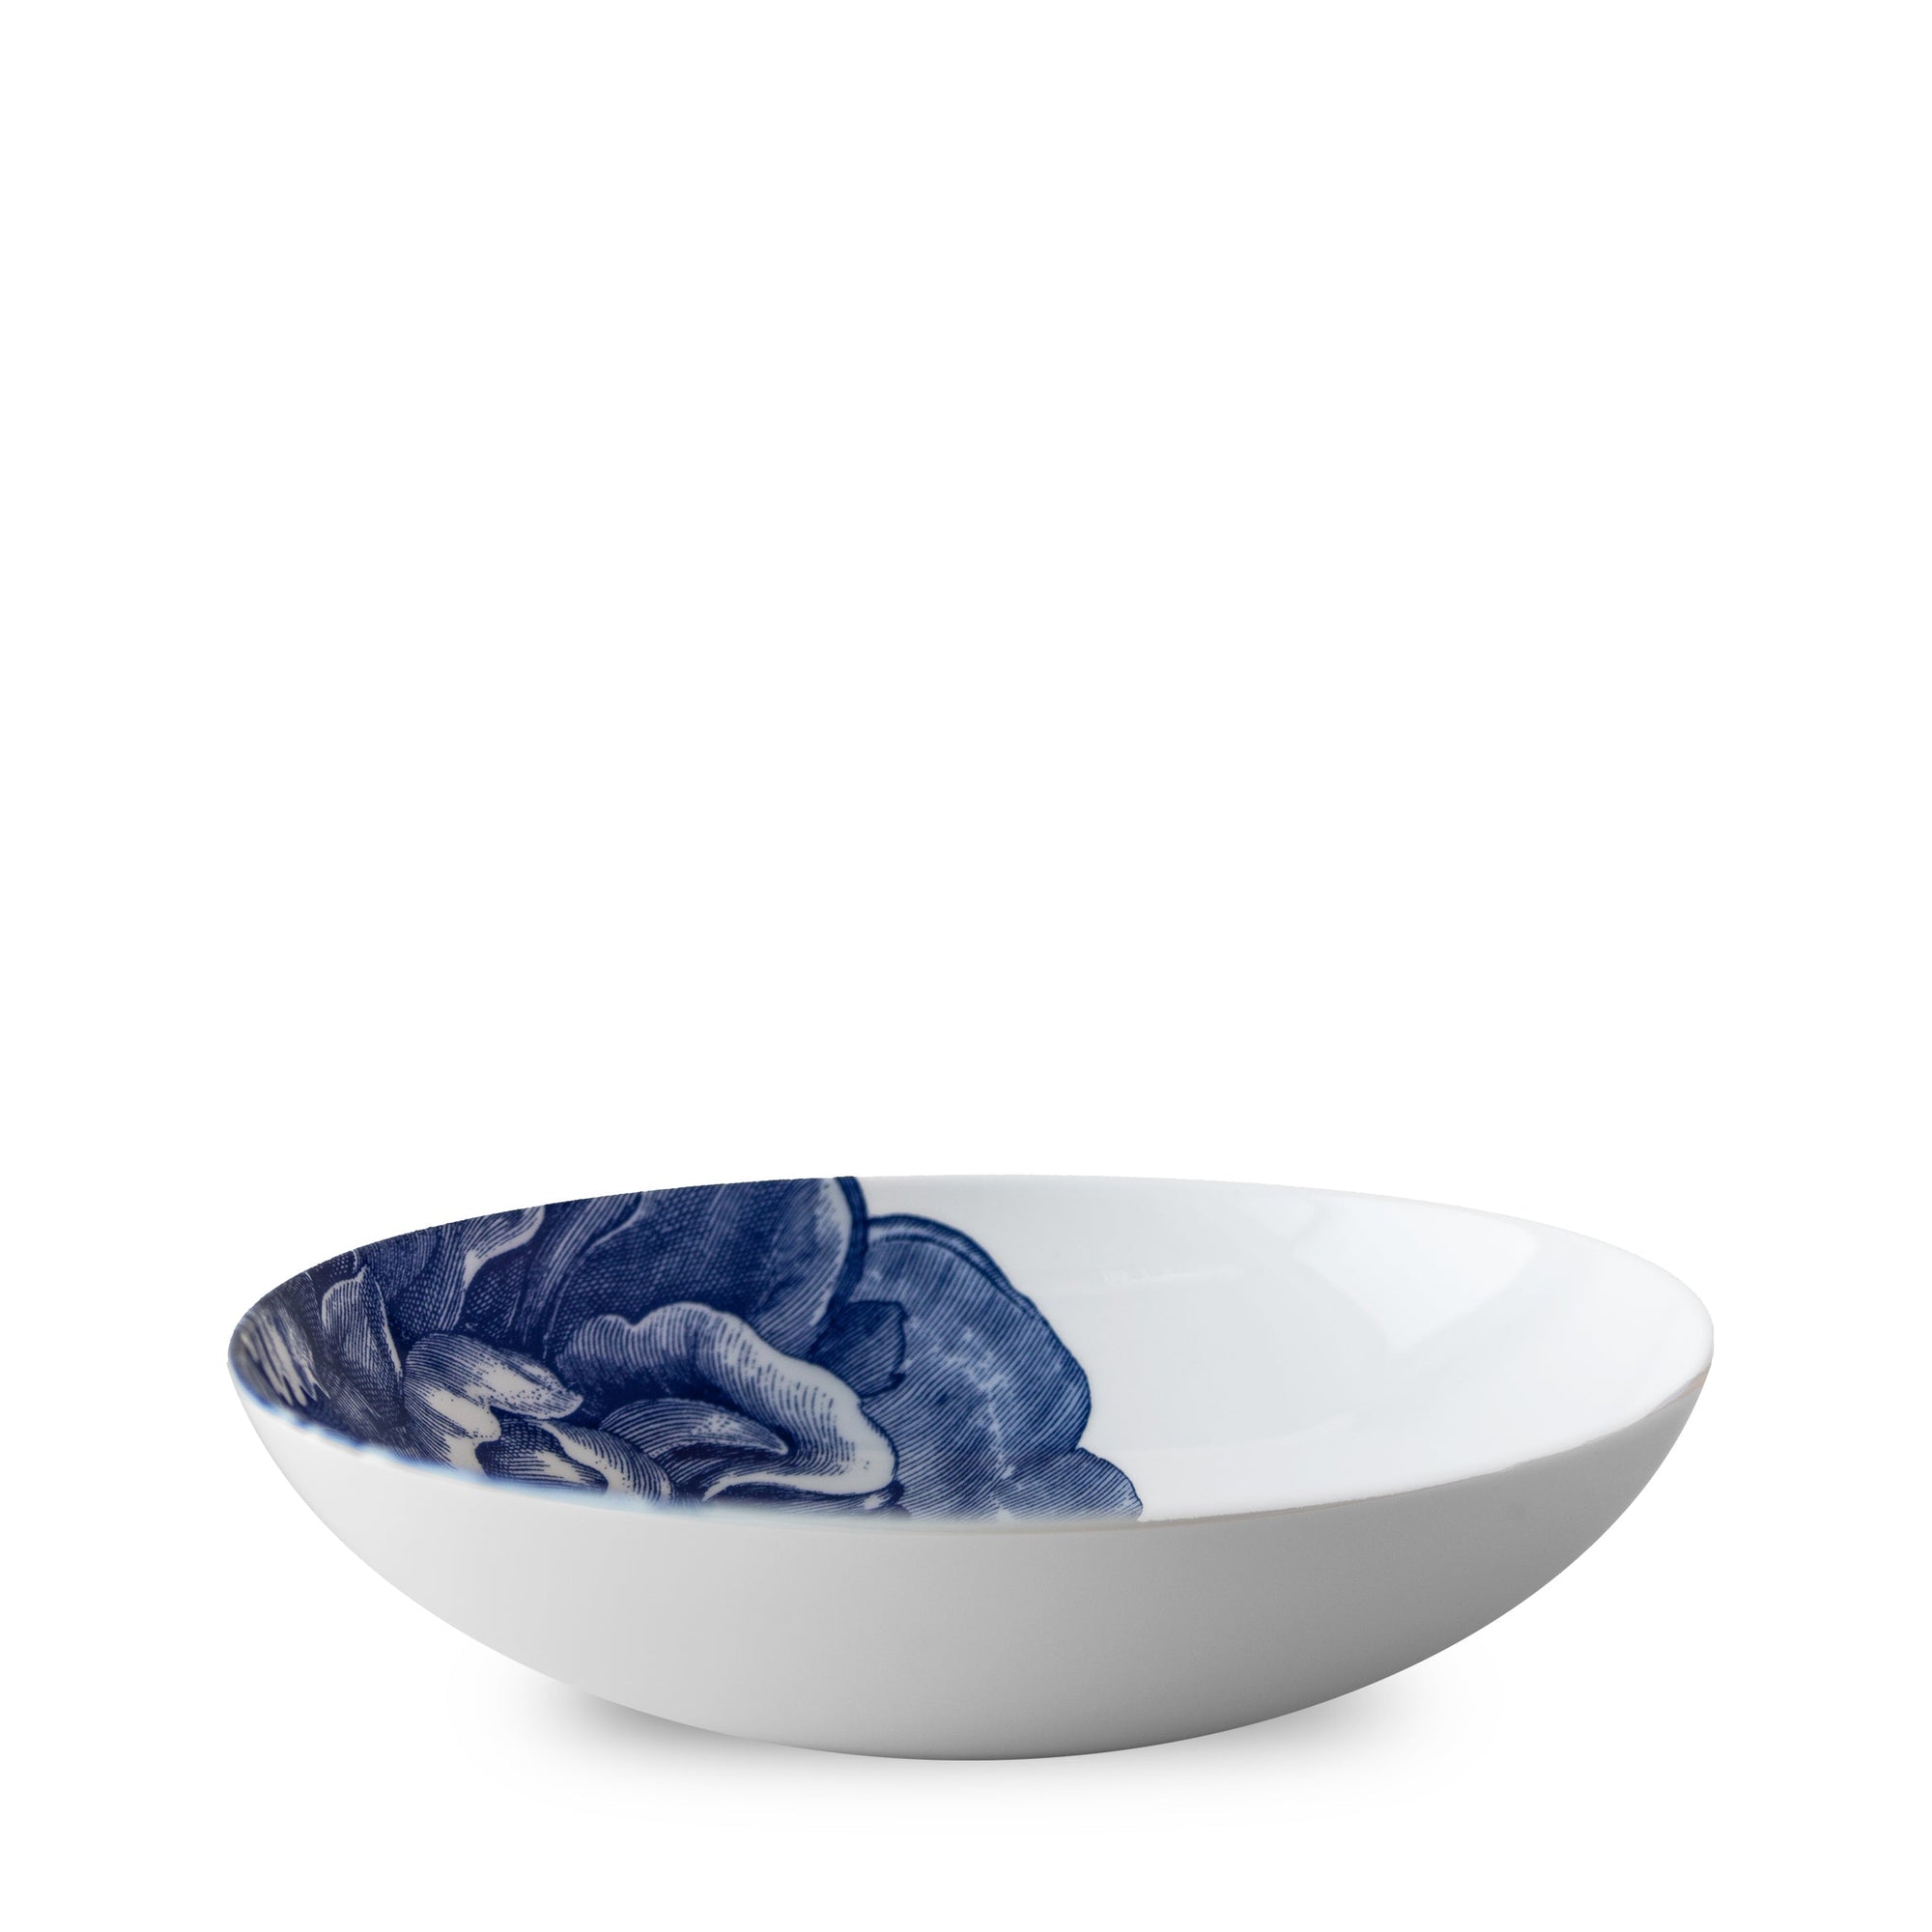 A Peony Blue Coupe Soup Bowl from Caskata Artisanal Home, a premium porcelain plate with a blue and white peony flower design on it.